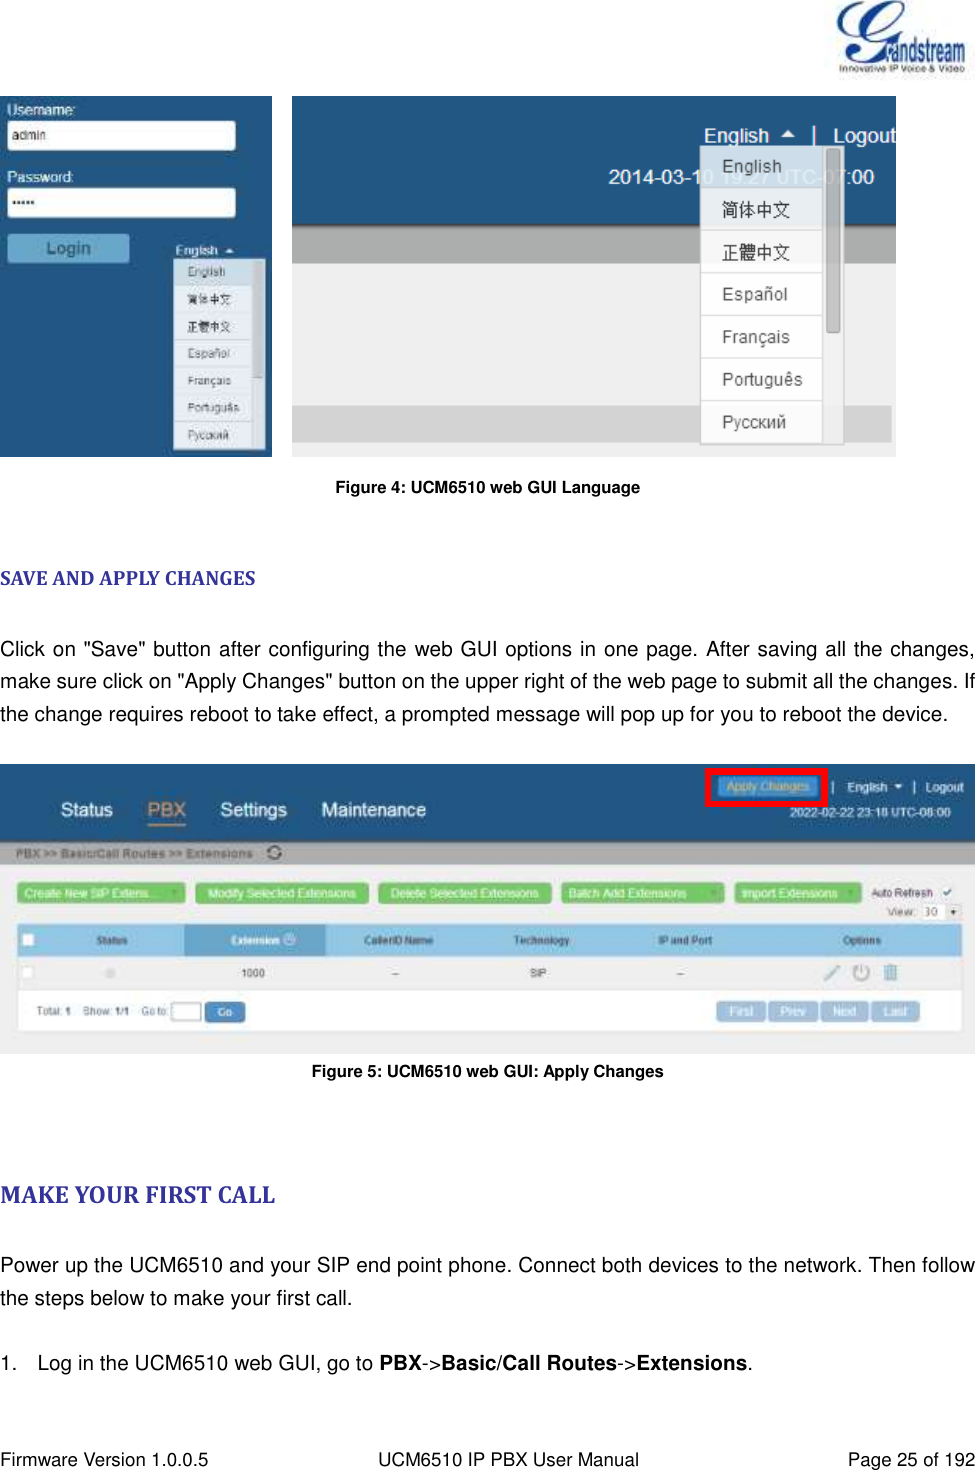  Firmware Version 1.0.0.5 UCM6510 IP PBX User Manual Page 25 of 192      Figure 4: UCM6510 web GUI Language  SAVE AND APPLY CHANGES  Click on &quot;Save&quot; button after configuring the web GUI options in one page. After saving all the changes, make sure click on &quot;Apply Changes&quot; button on the upper right of the web page to submit all the changes. If the change requires reboot to take effect, a prompted message will pop up for you to reboot the device.   Figure 5: UCM6510 web GUI: Apply Changes   MAKE YOUR FIRST CALL  Power up the UCM6510 and your SIP end point phone. Connect both devices to the network. Then follow the steps below to make your first call.  1.  Log in the UCM6510 web GUI, go to PBX-&gt;Basic/Call Routes-&gt;Extensions. 